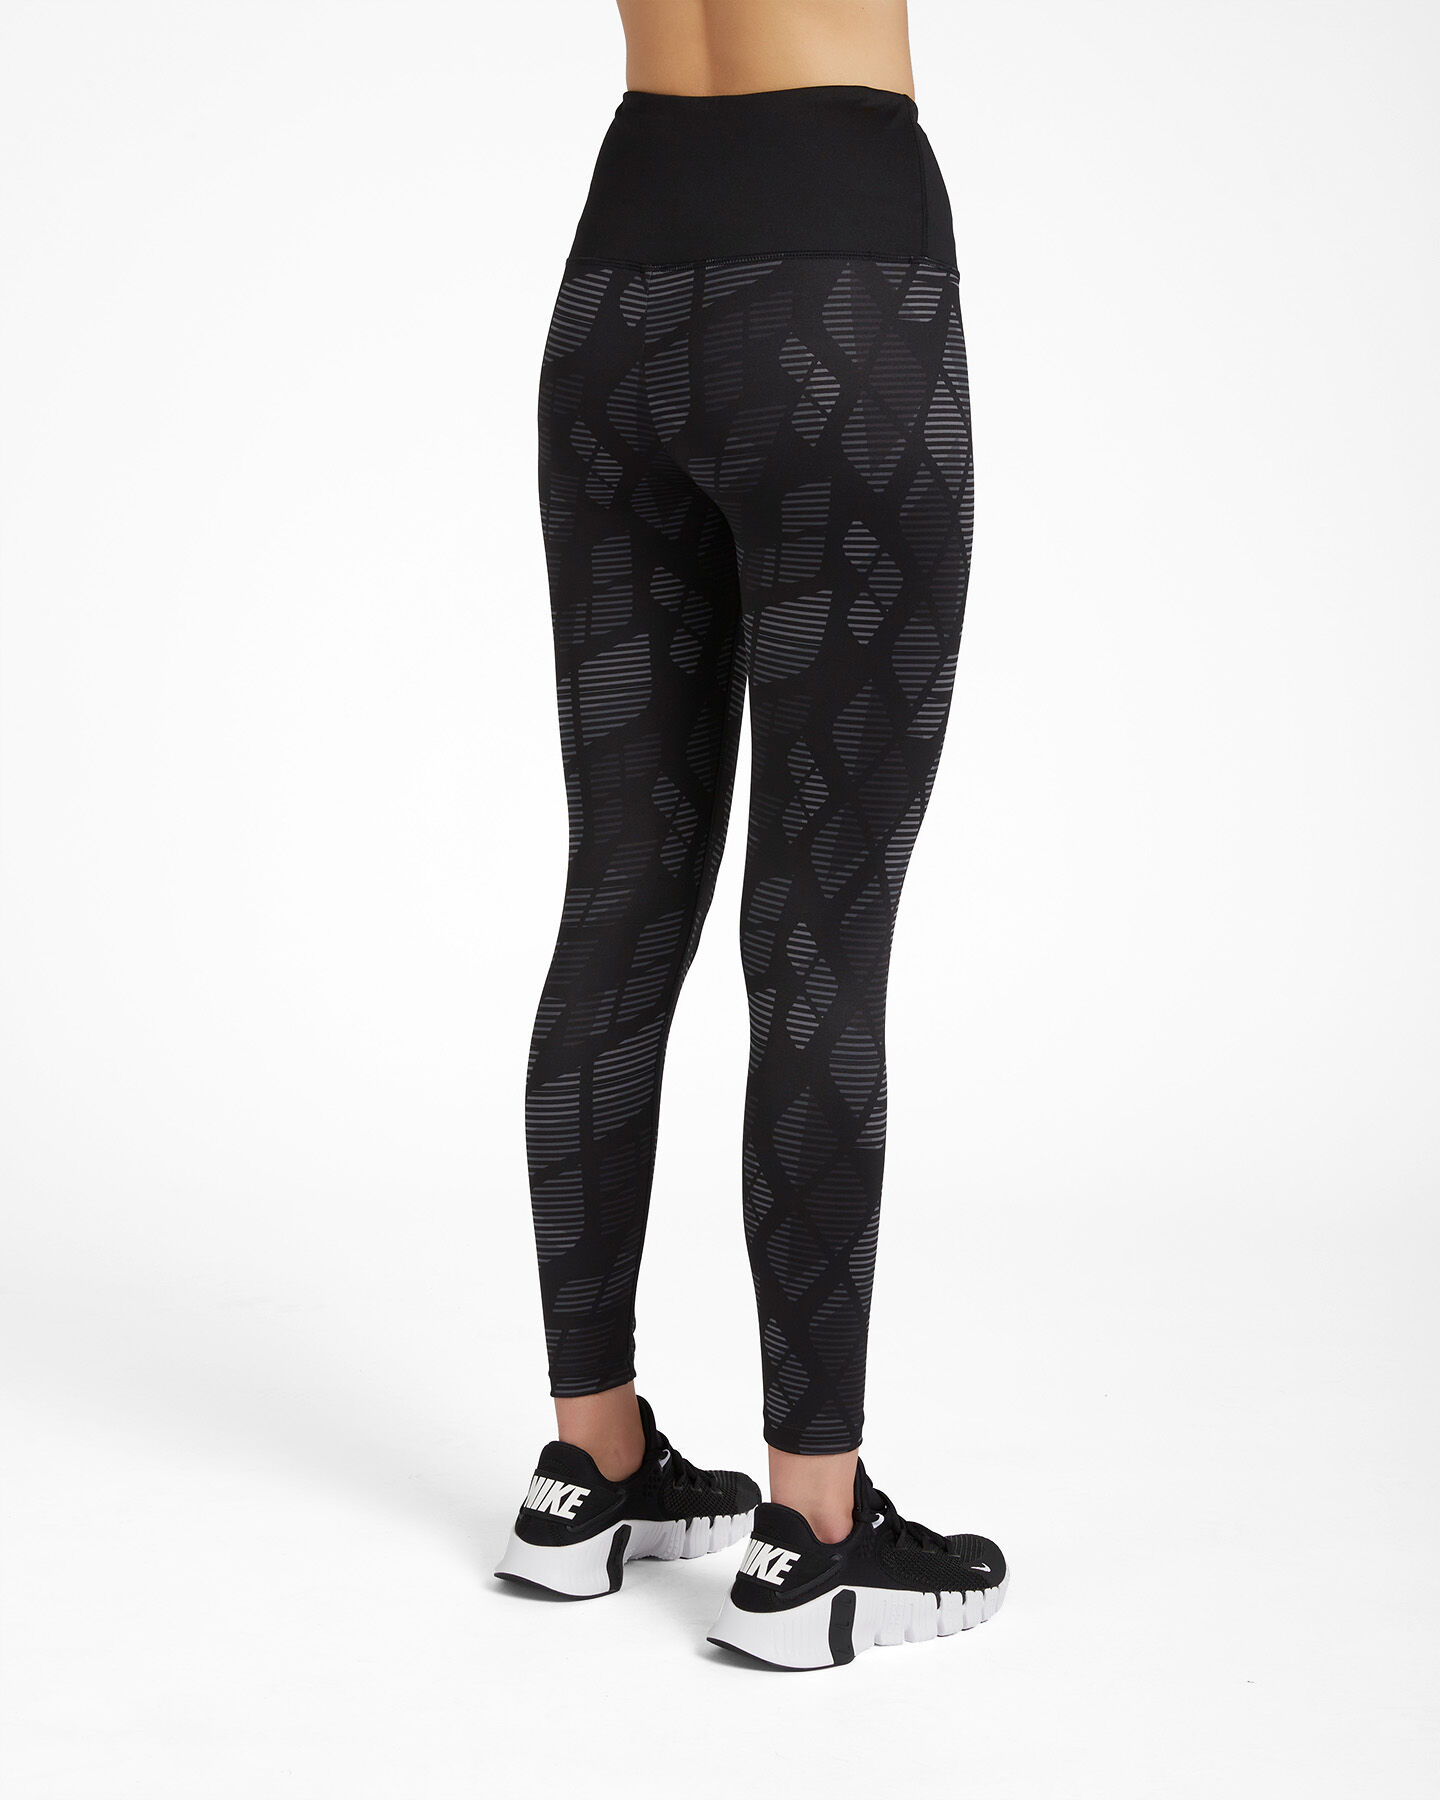  Leggings ARENA POLY AOP W S4093747|AOP|XS scatto 1